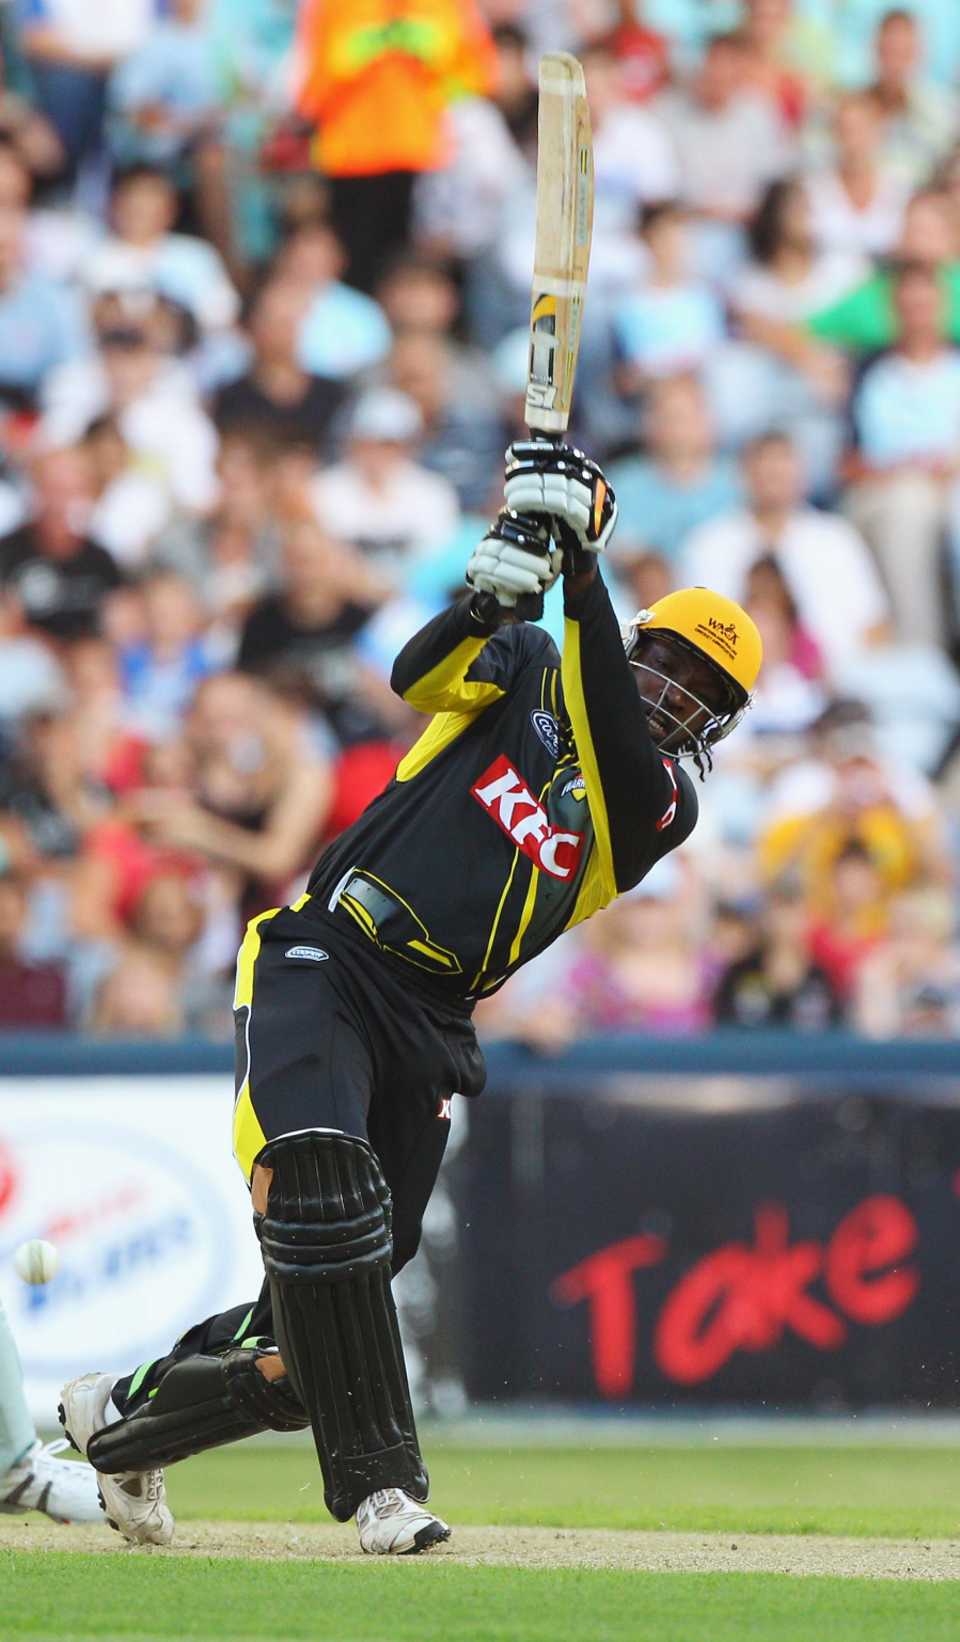 Chris Gayle smashes a six during his record-breaking innings, New South Wales v Western Australia, Big Bash, Sydney, January 9, 2011